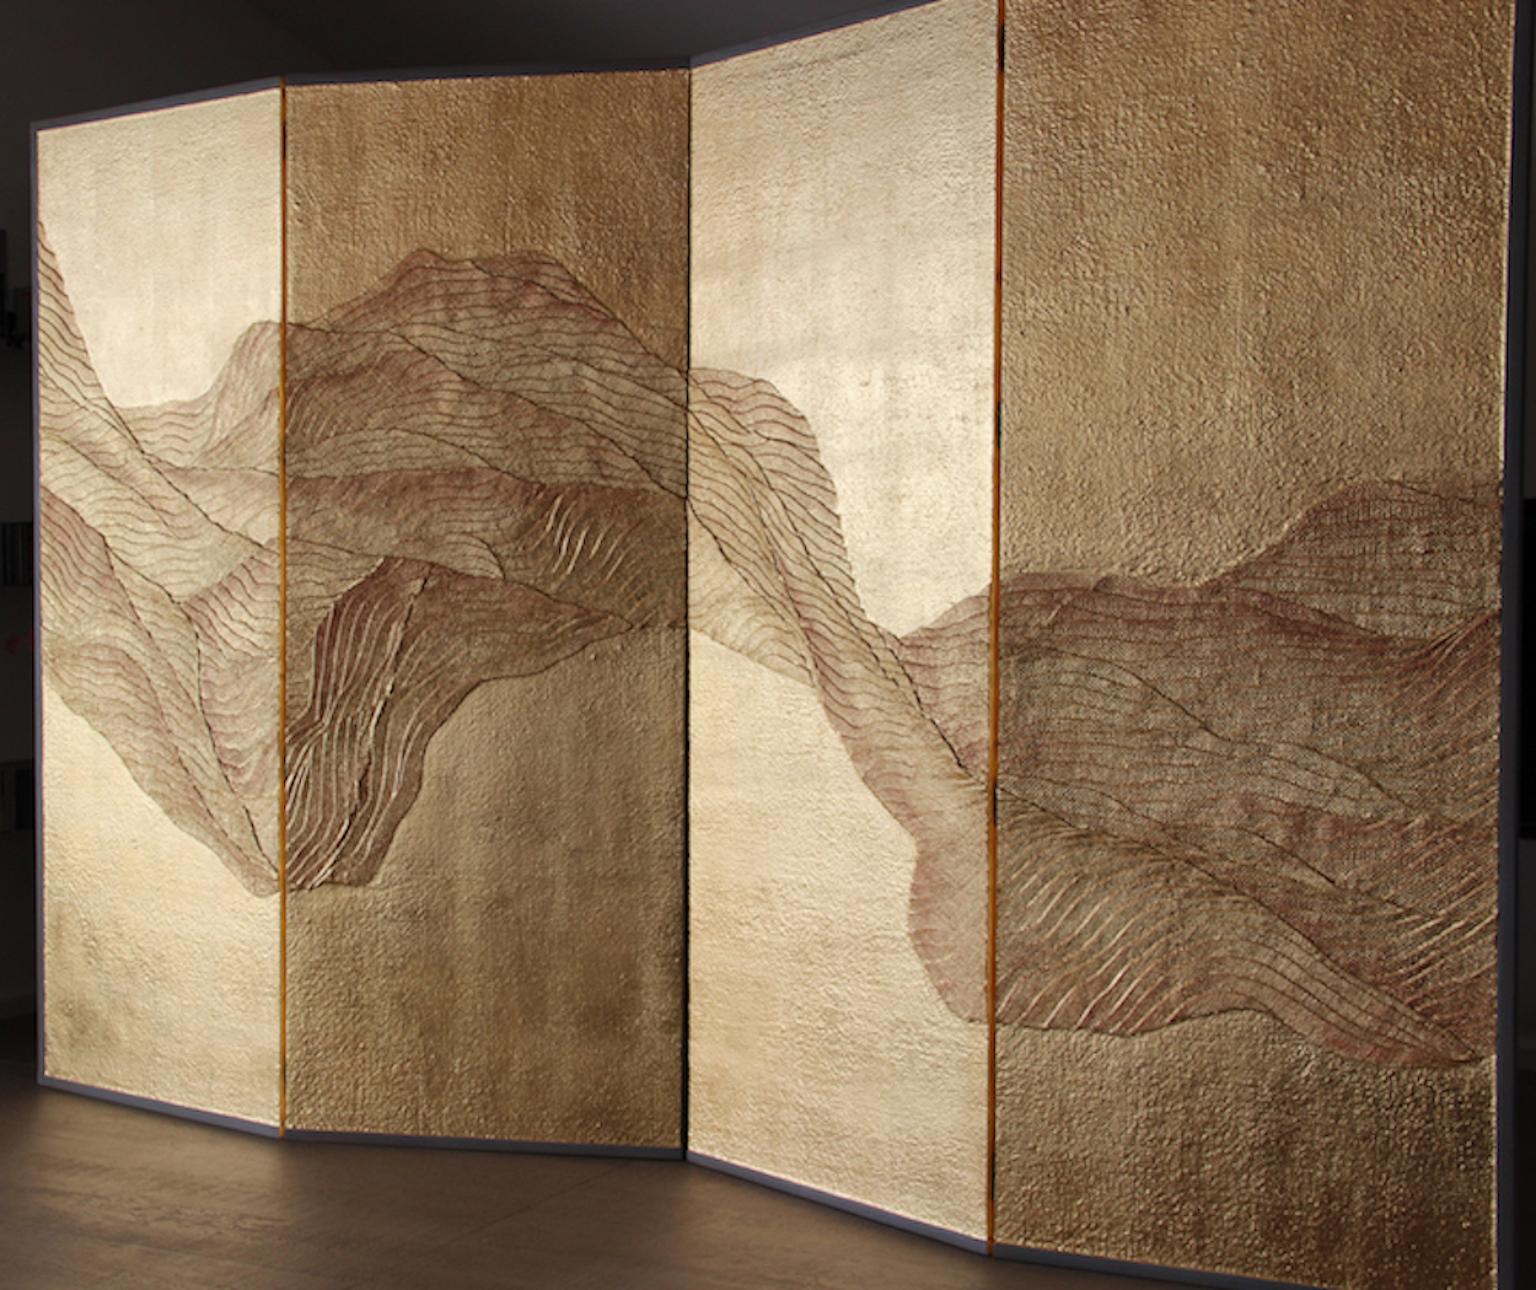 A folding screen by Vadim Garine, mixed technique folding screen painted with tempera and gold leaf, supported by a painted sanded wood frame. The screen folds in four parts standing by itself. The textured figure creates contrast between the shiny